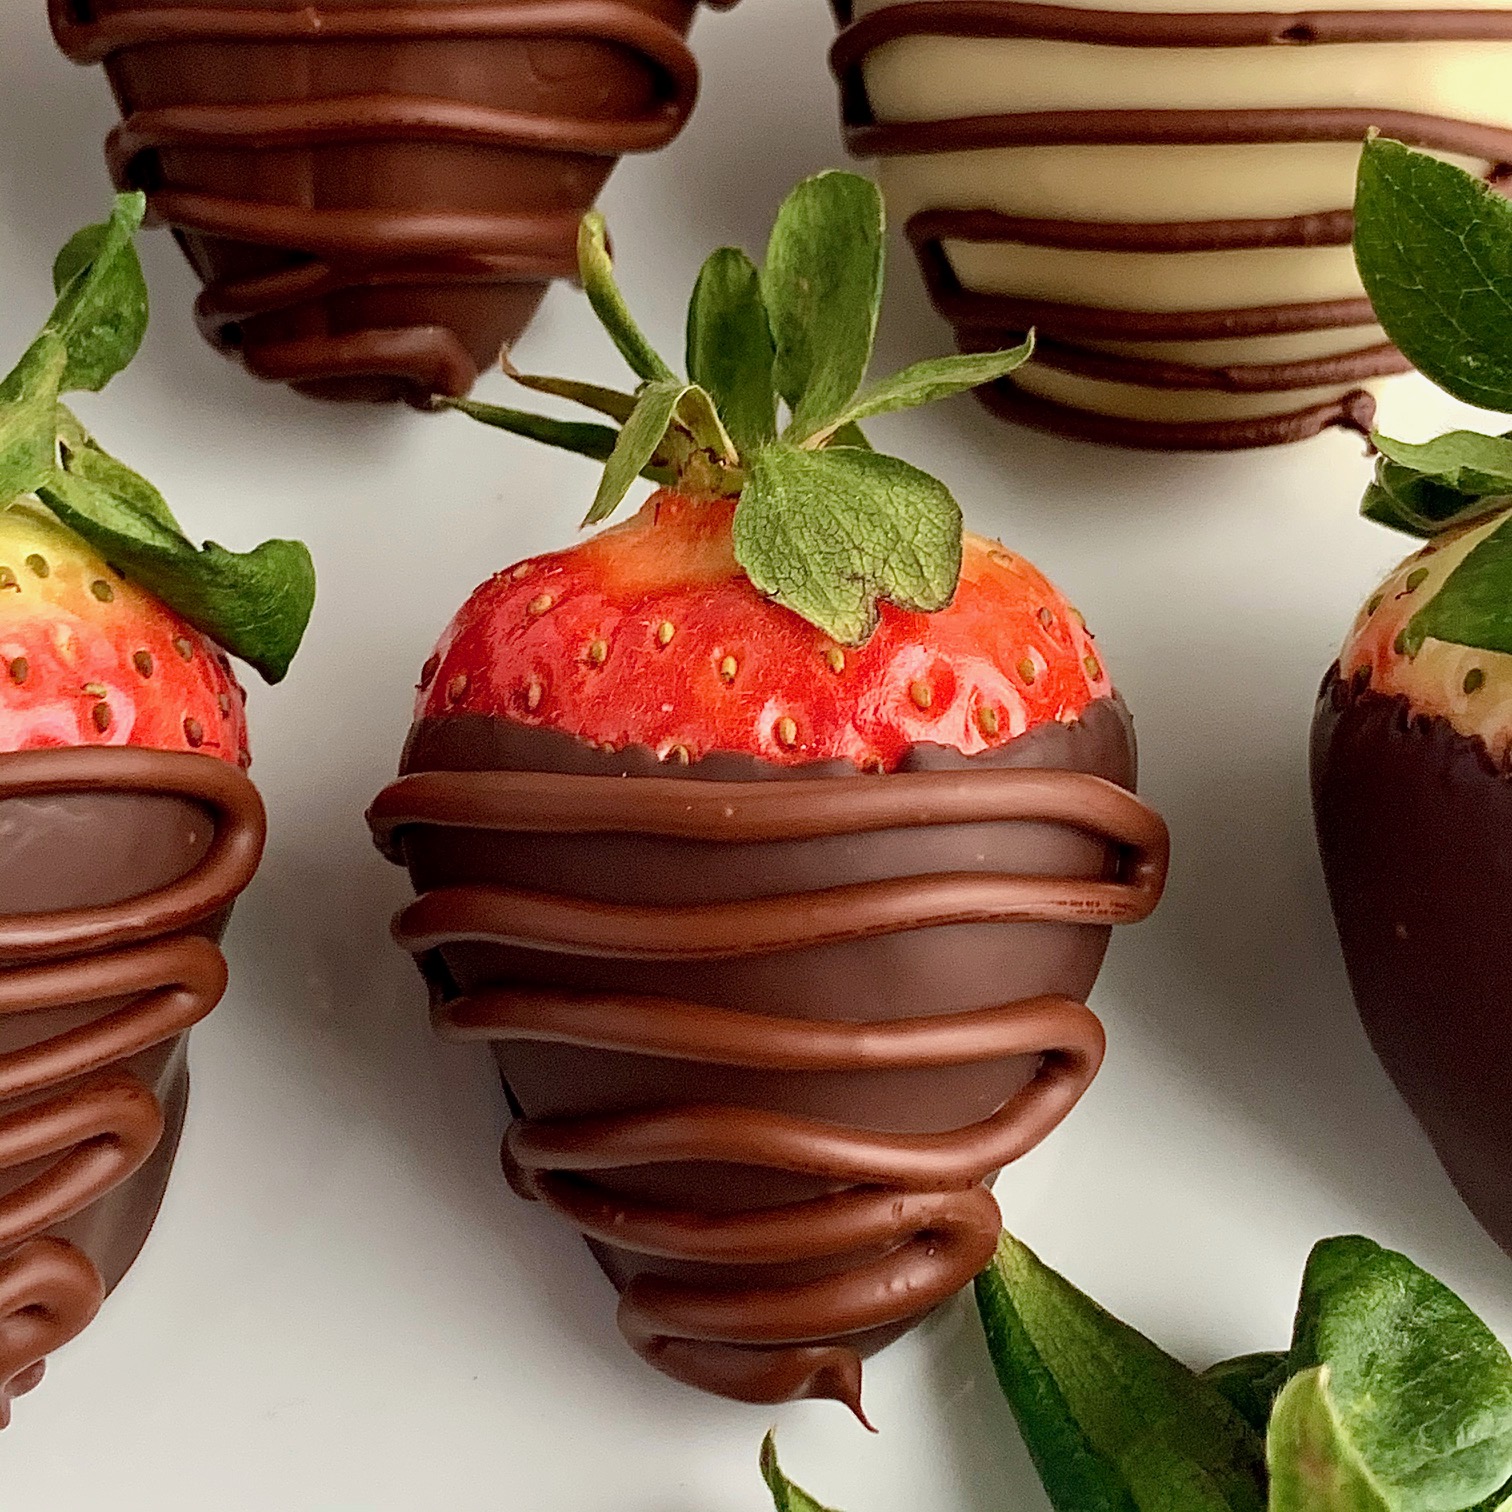 A strawberry with melted chocolate drizzled across it.